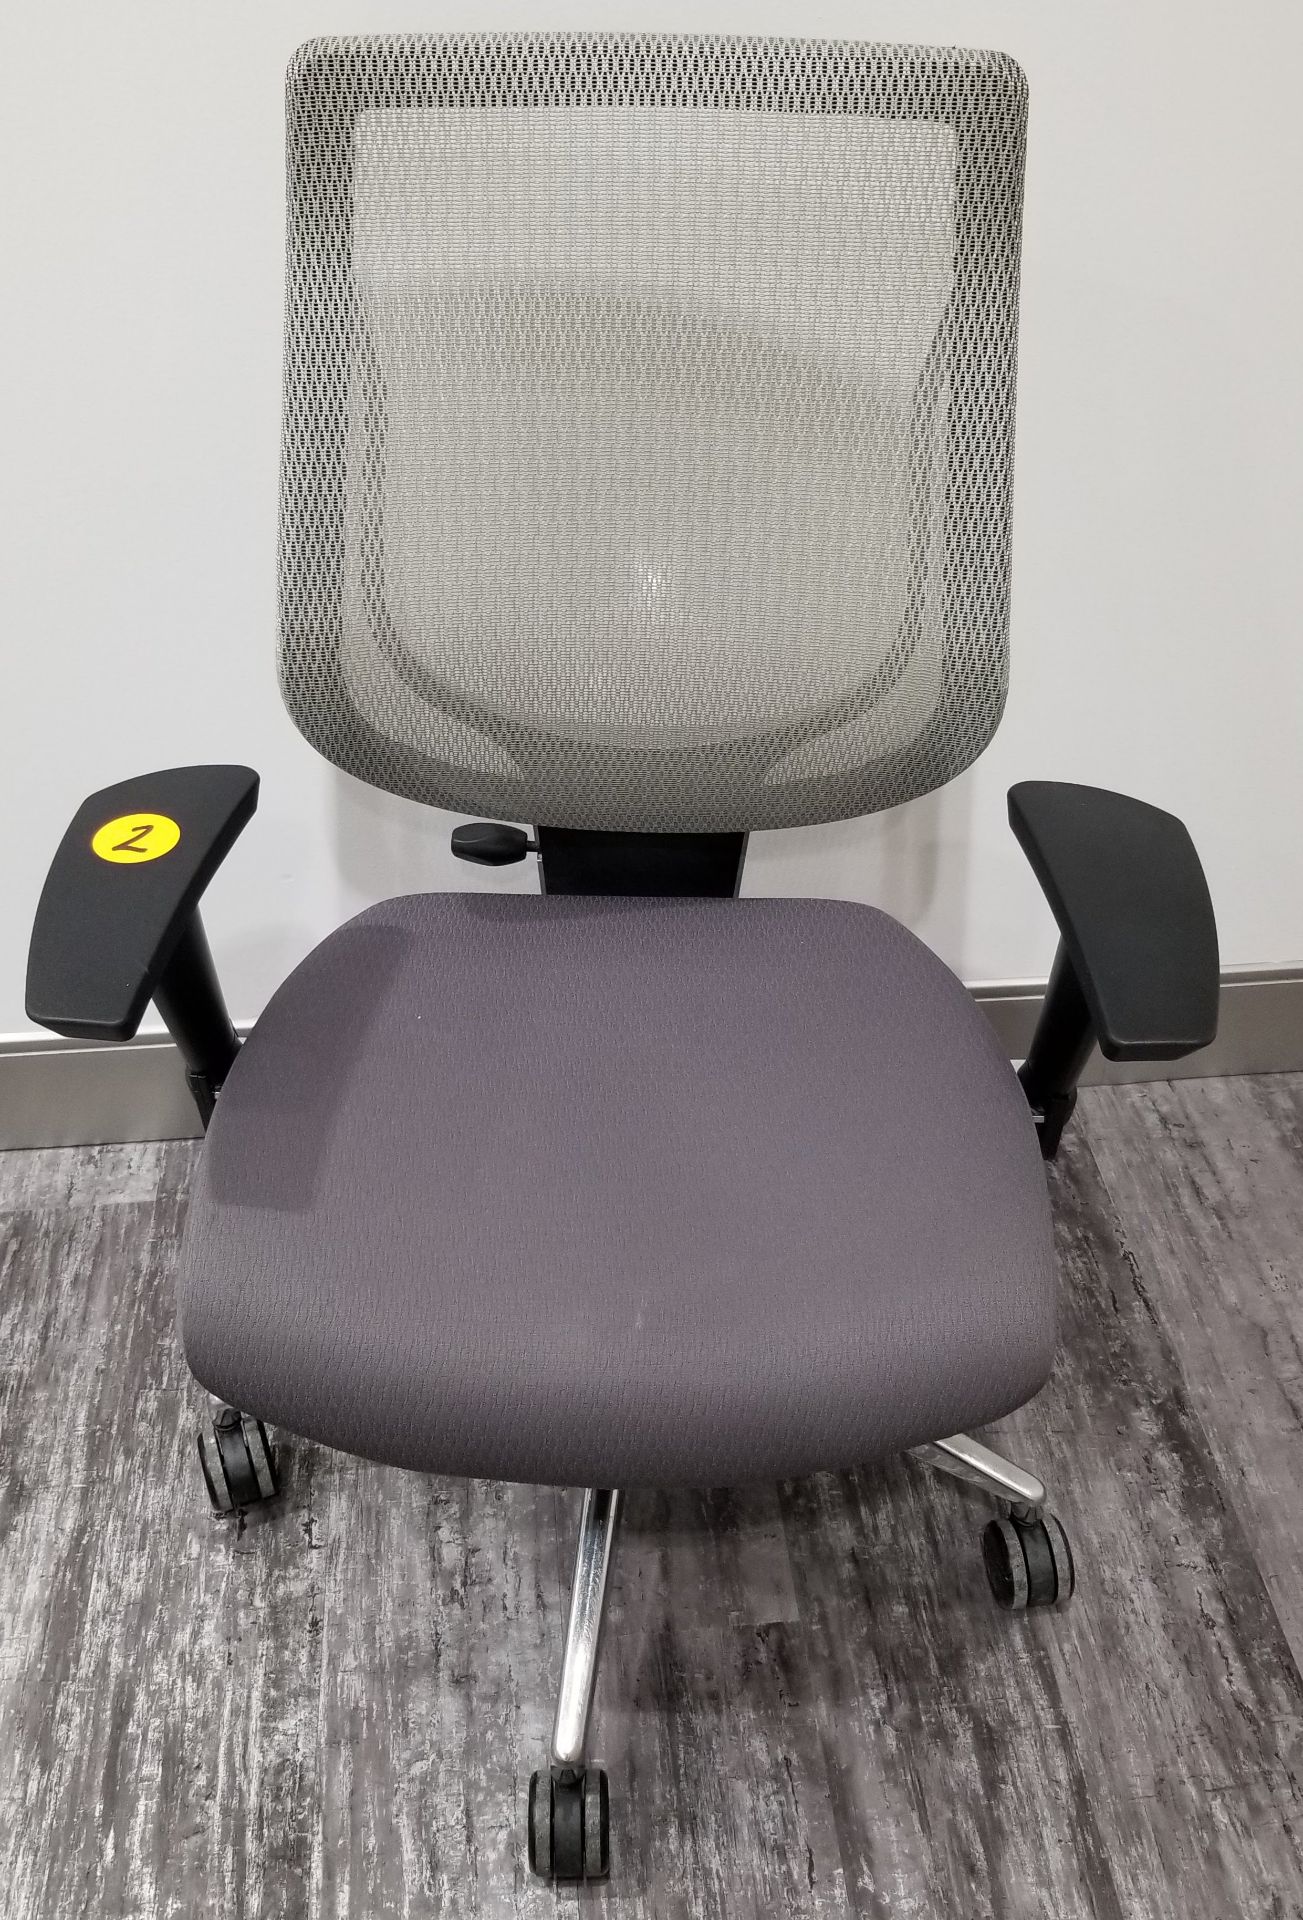 ALLSEATING - EXEC. CHAIR ON CASTERS, GREY W/ MESH BACK, ADJUSTABLE HEIGHT, ADJUSTABLE ARMS